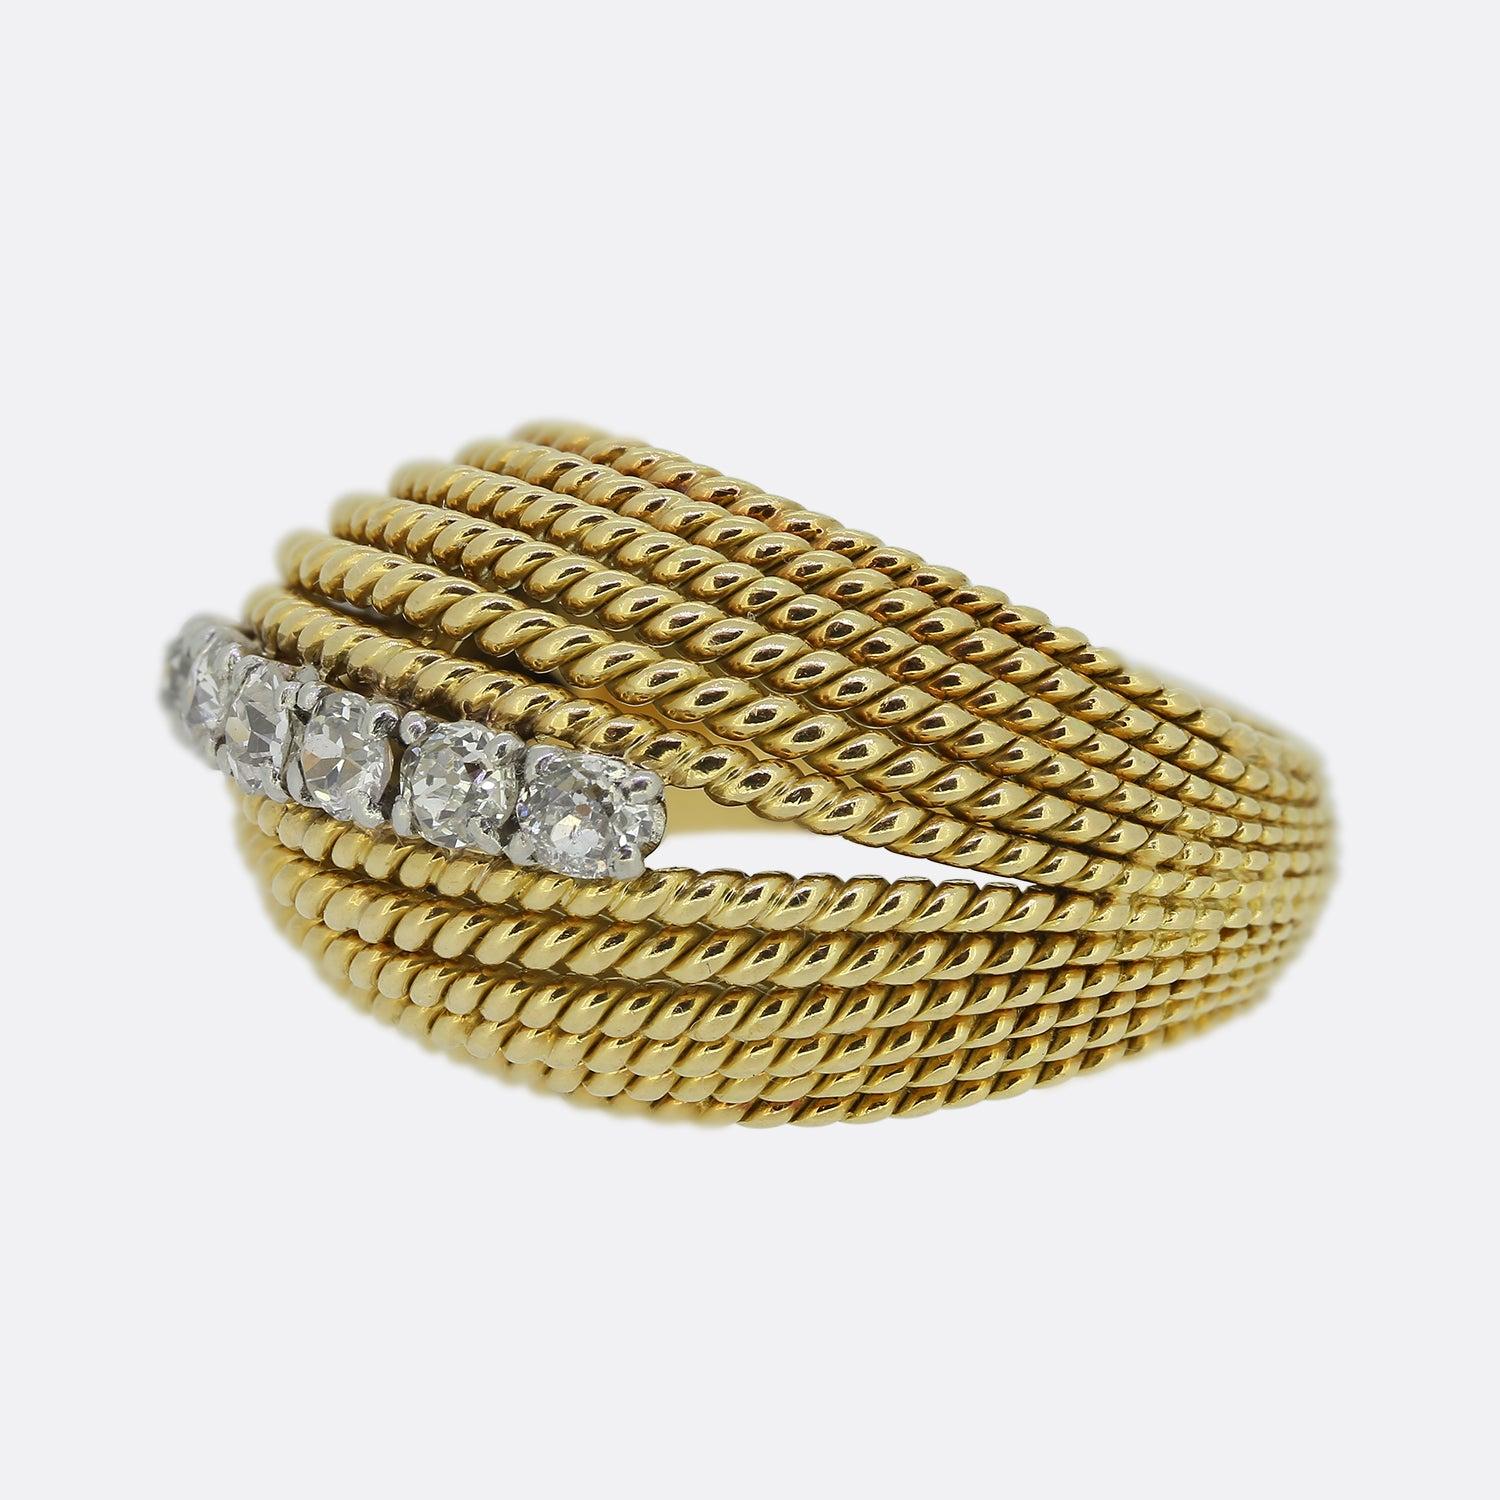 Here we have a charming vintage ring featuring six round old cut diamonds set in white gold. This 18ct yellow gold piece is a visual delight having been crafted with multiple layers of roped texturing that graduate inwardly towards the focal